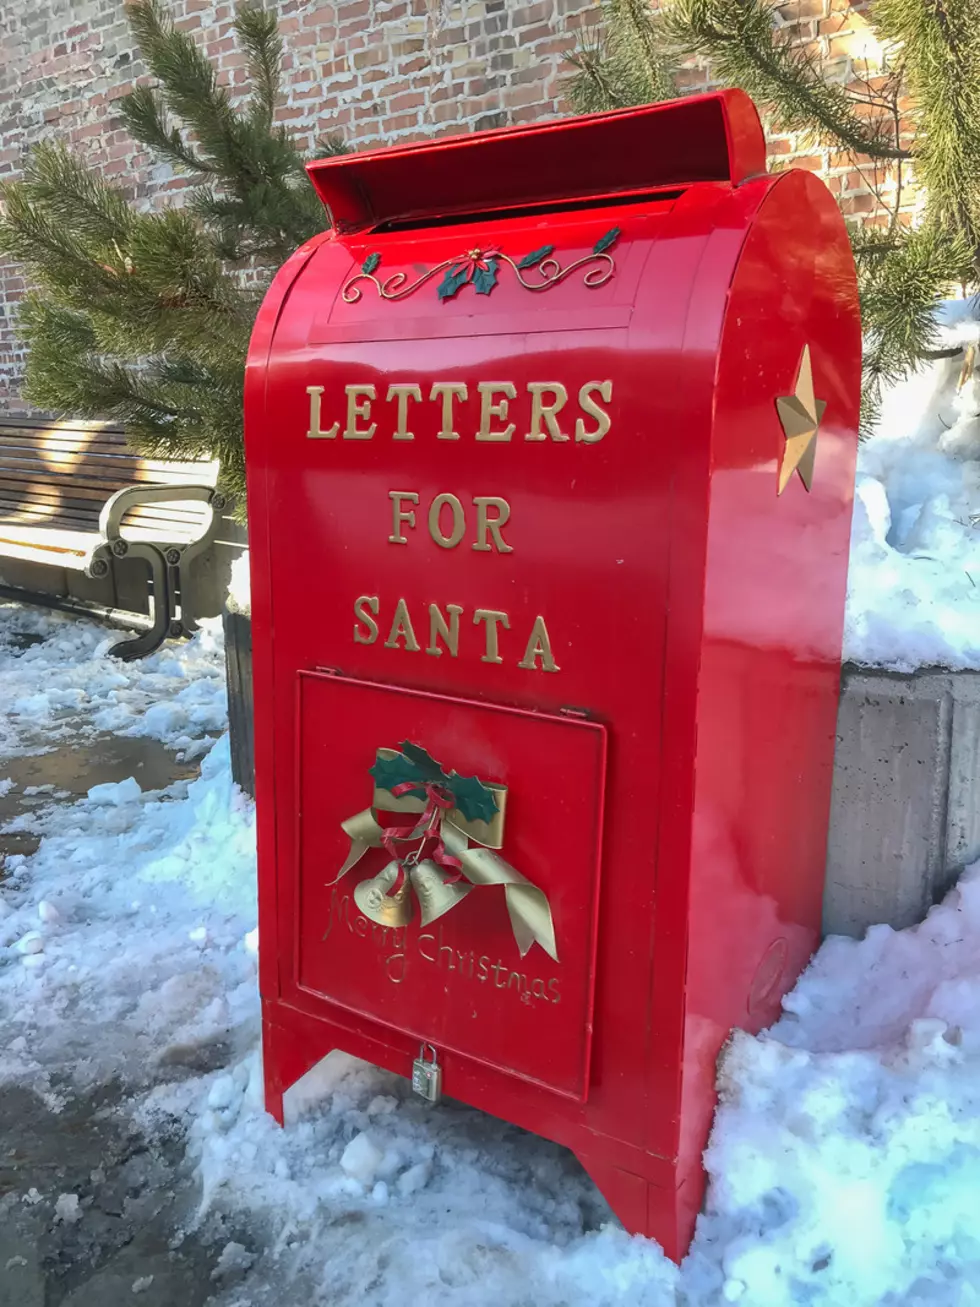 Local Man To Continue Tradition Of Helping Santa With Christmas Letters